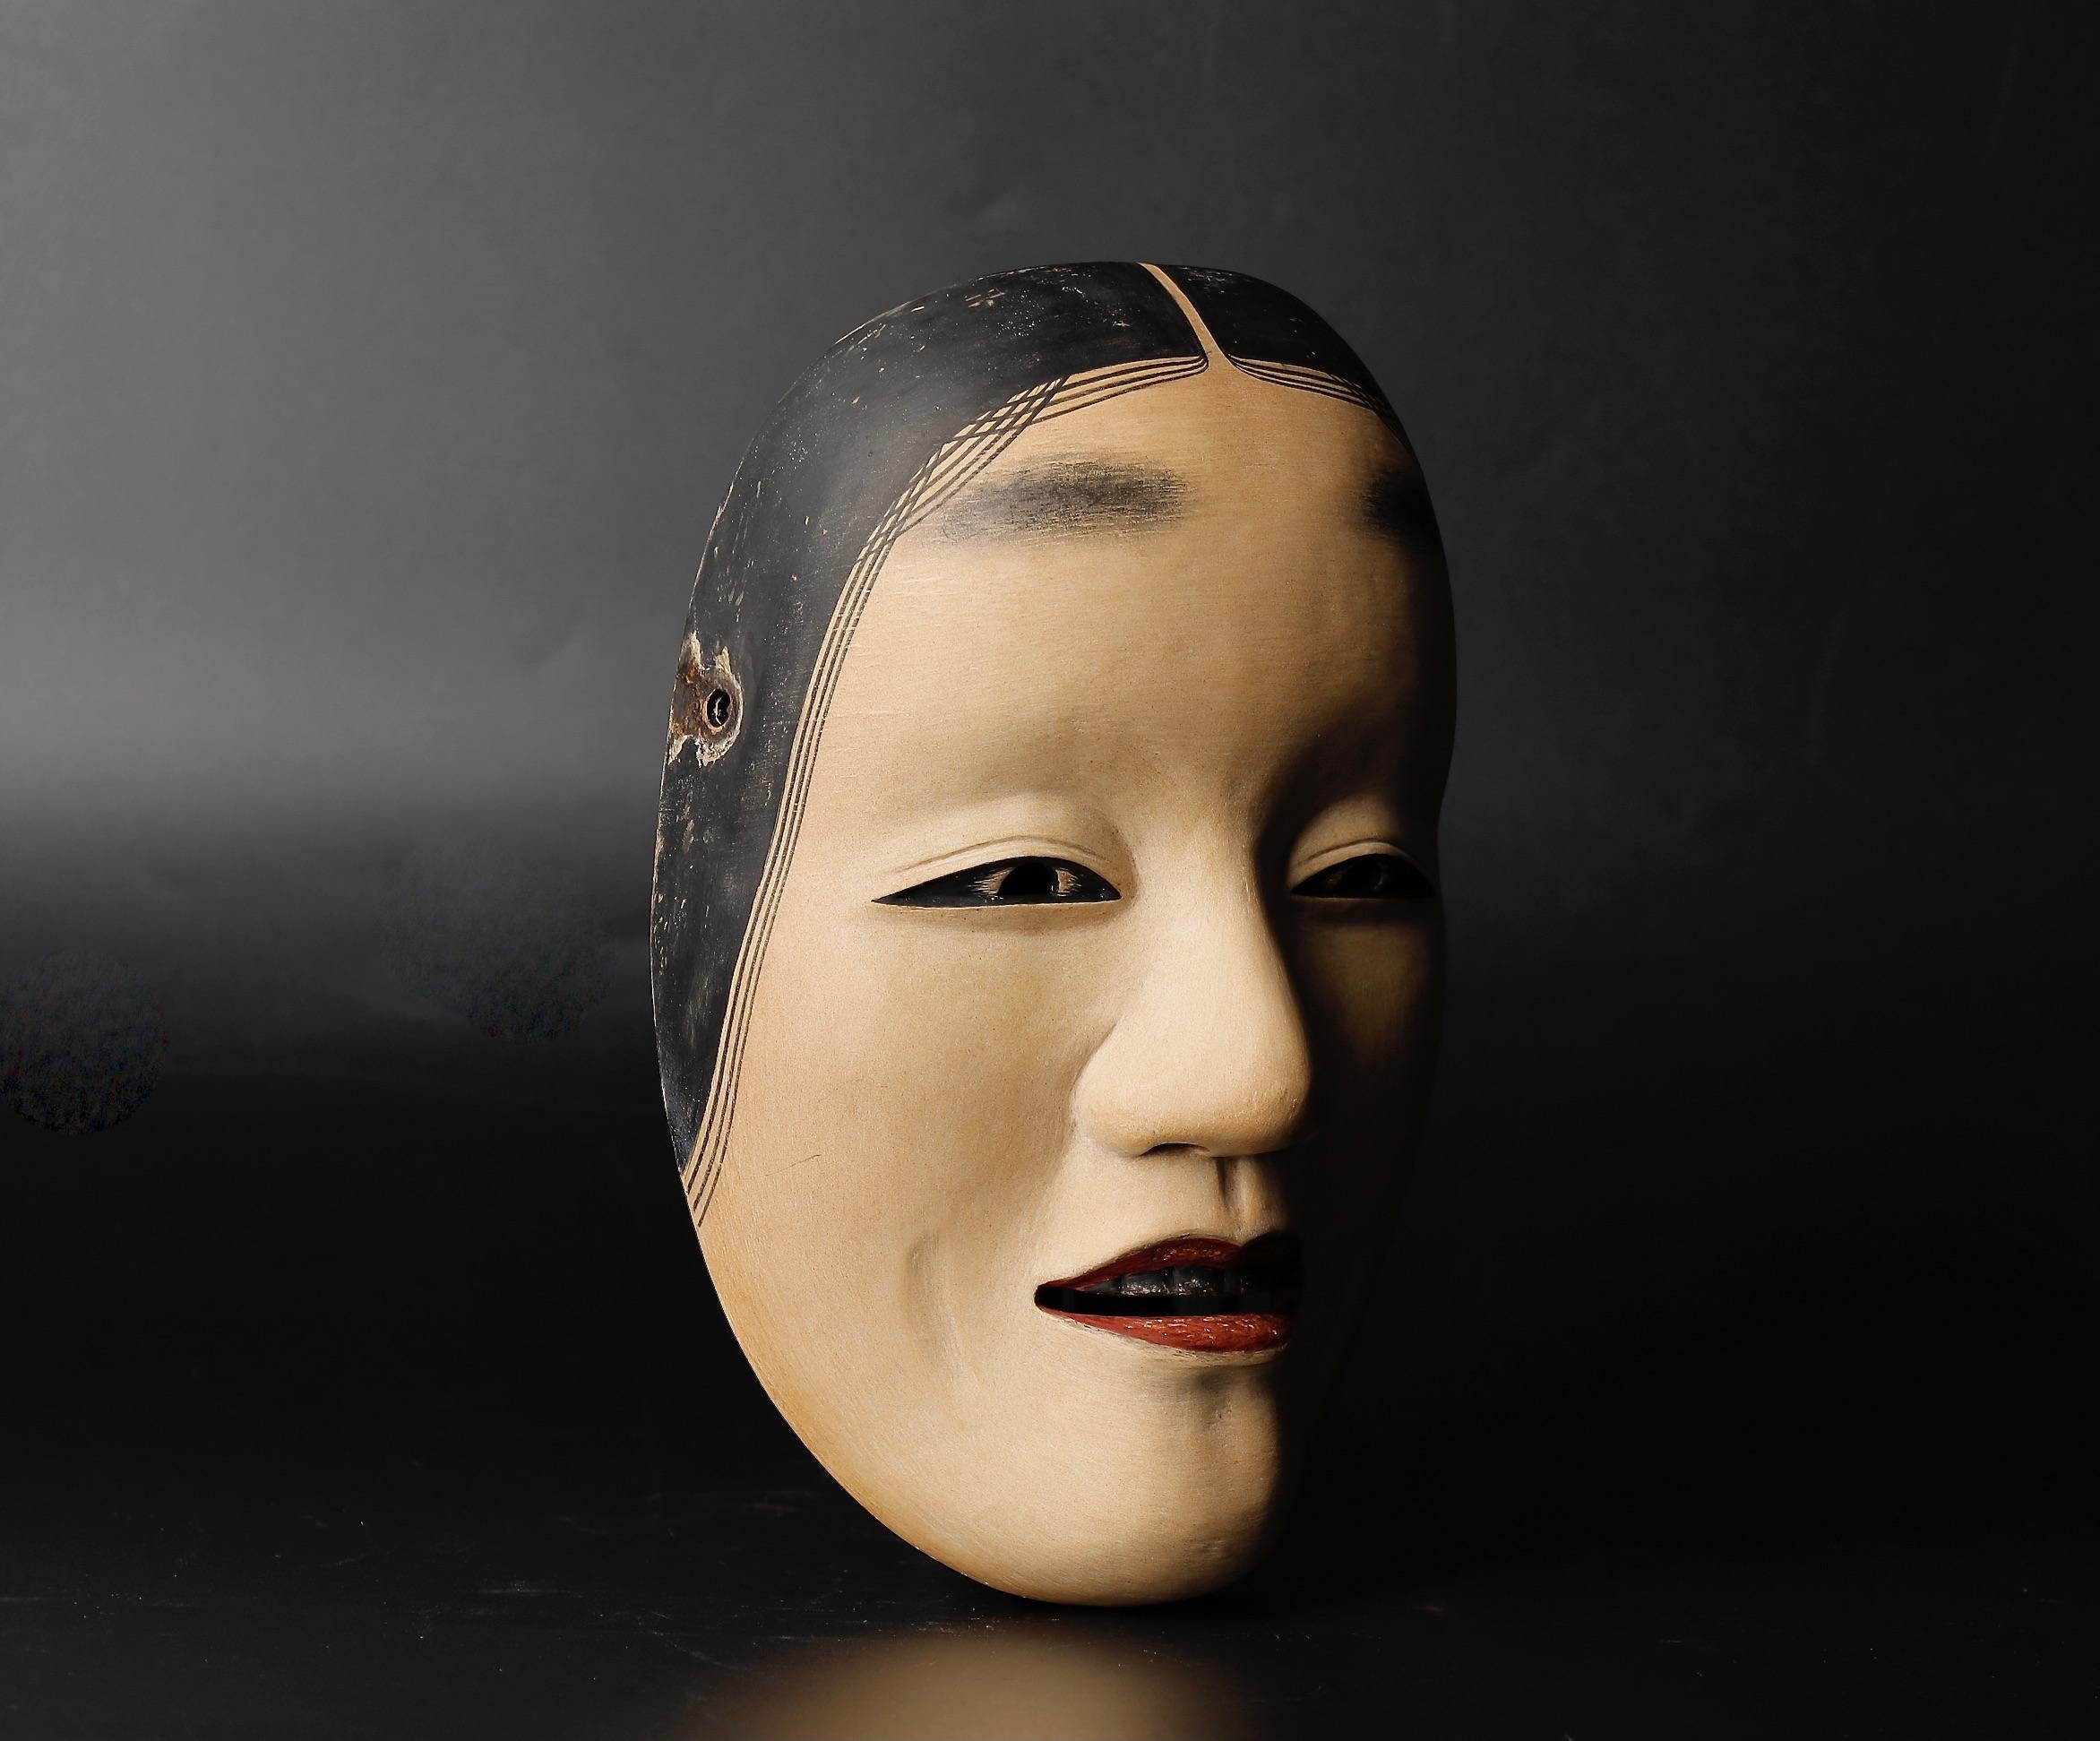 Showa Authentic Japanese Fukai Noh Mask Depicting Heartbreak of a Middle-Aged Woman For Sale